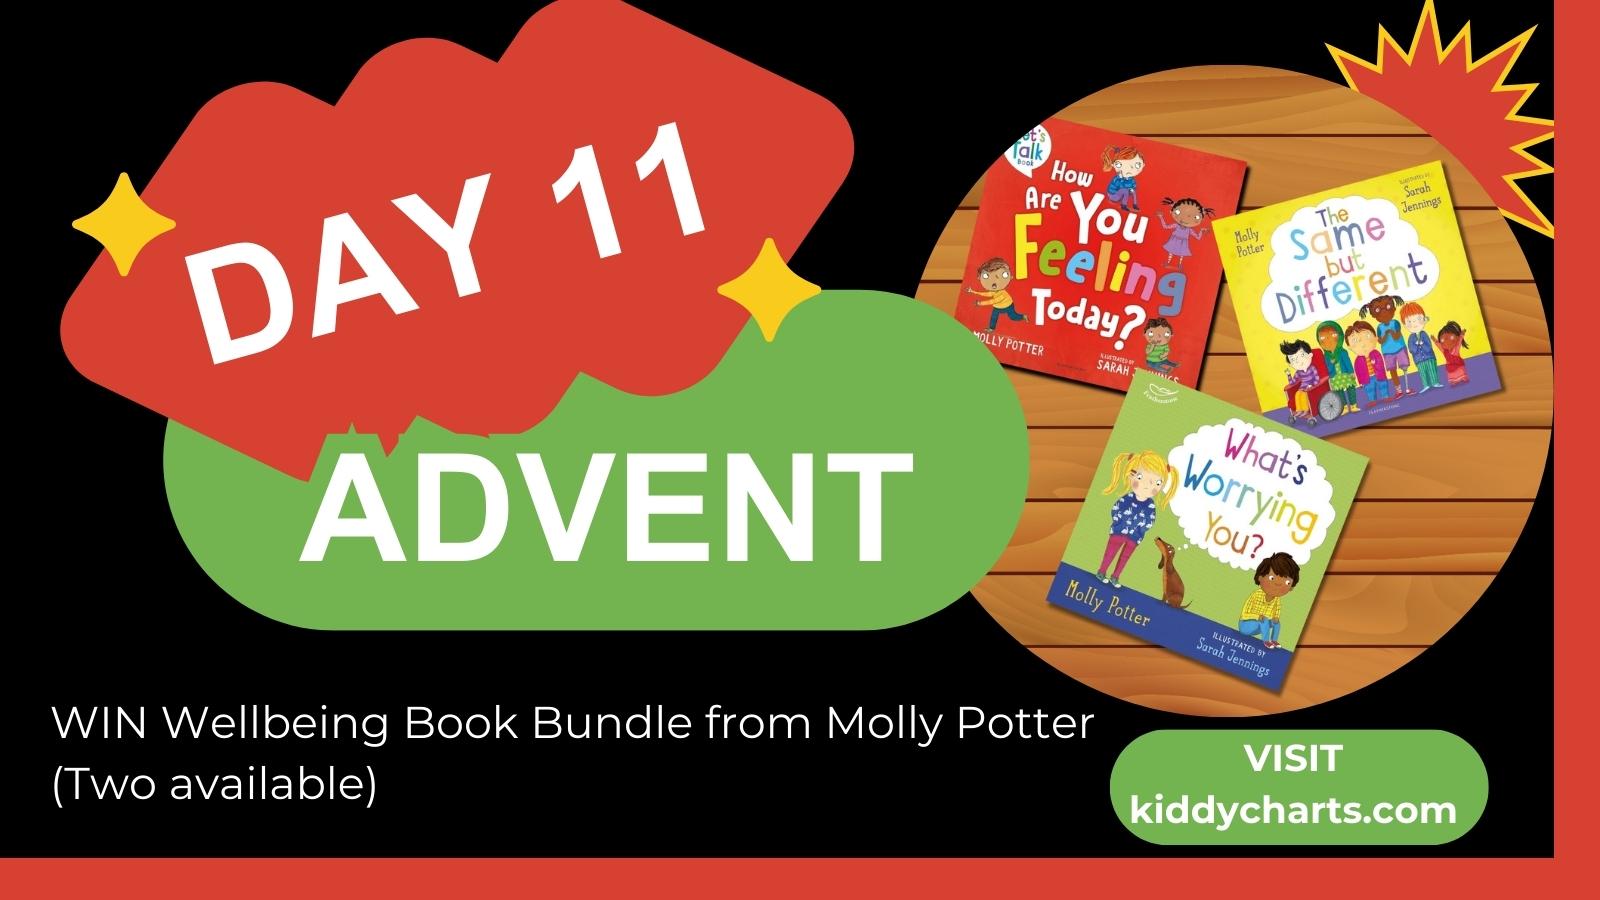 Day 11: Win Molly Potter wellbeing book bundle for kids #KiddyChartsAdvent